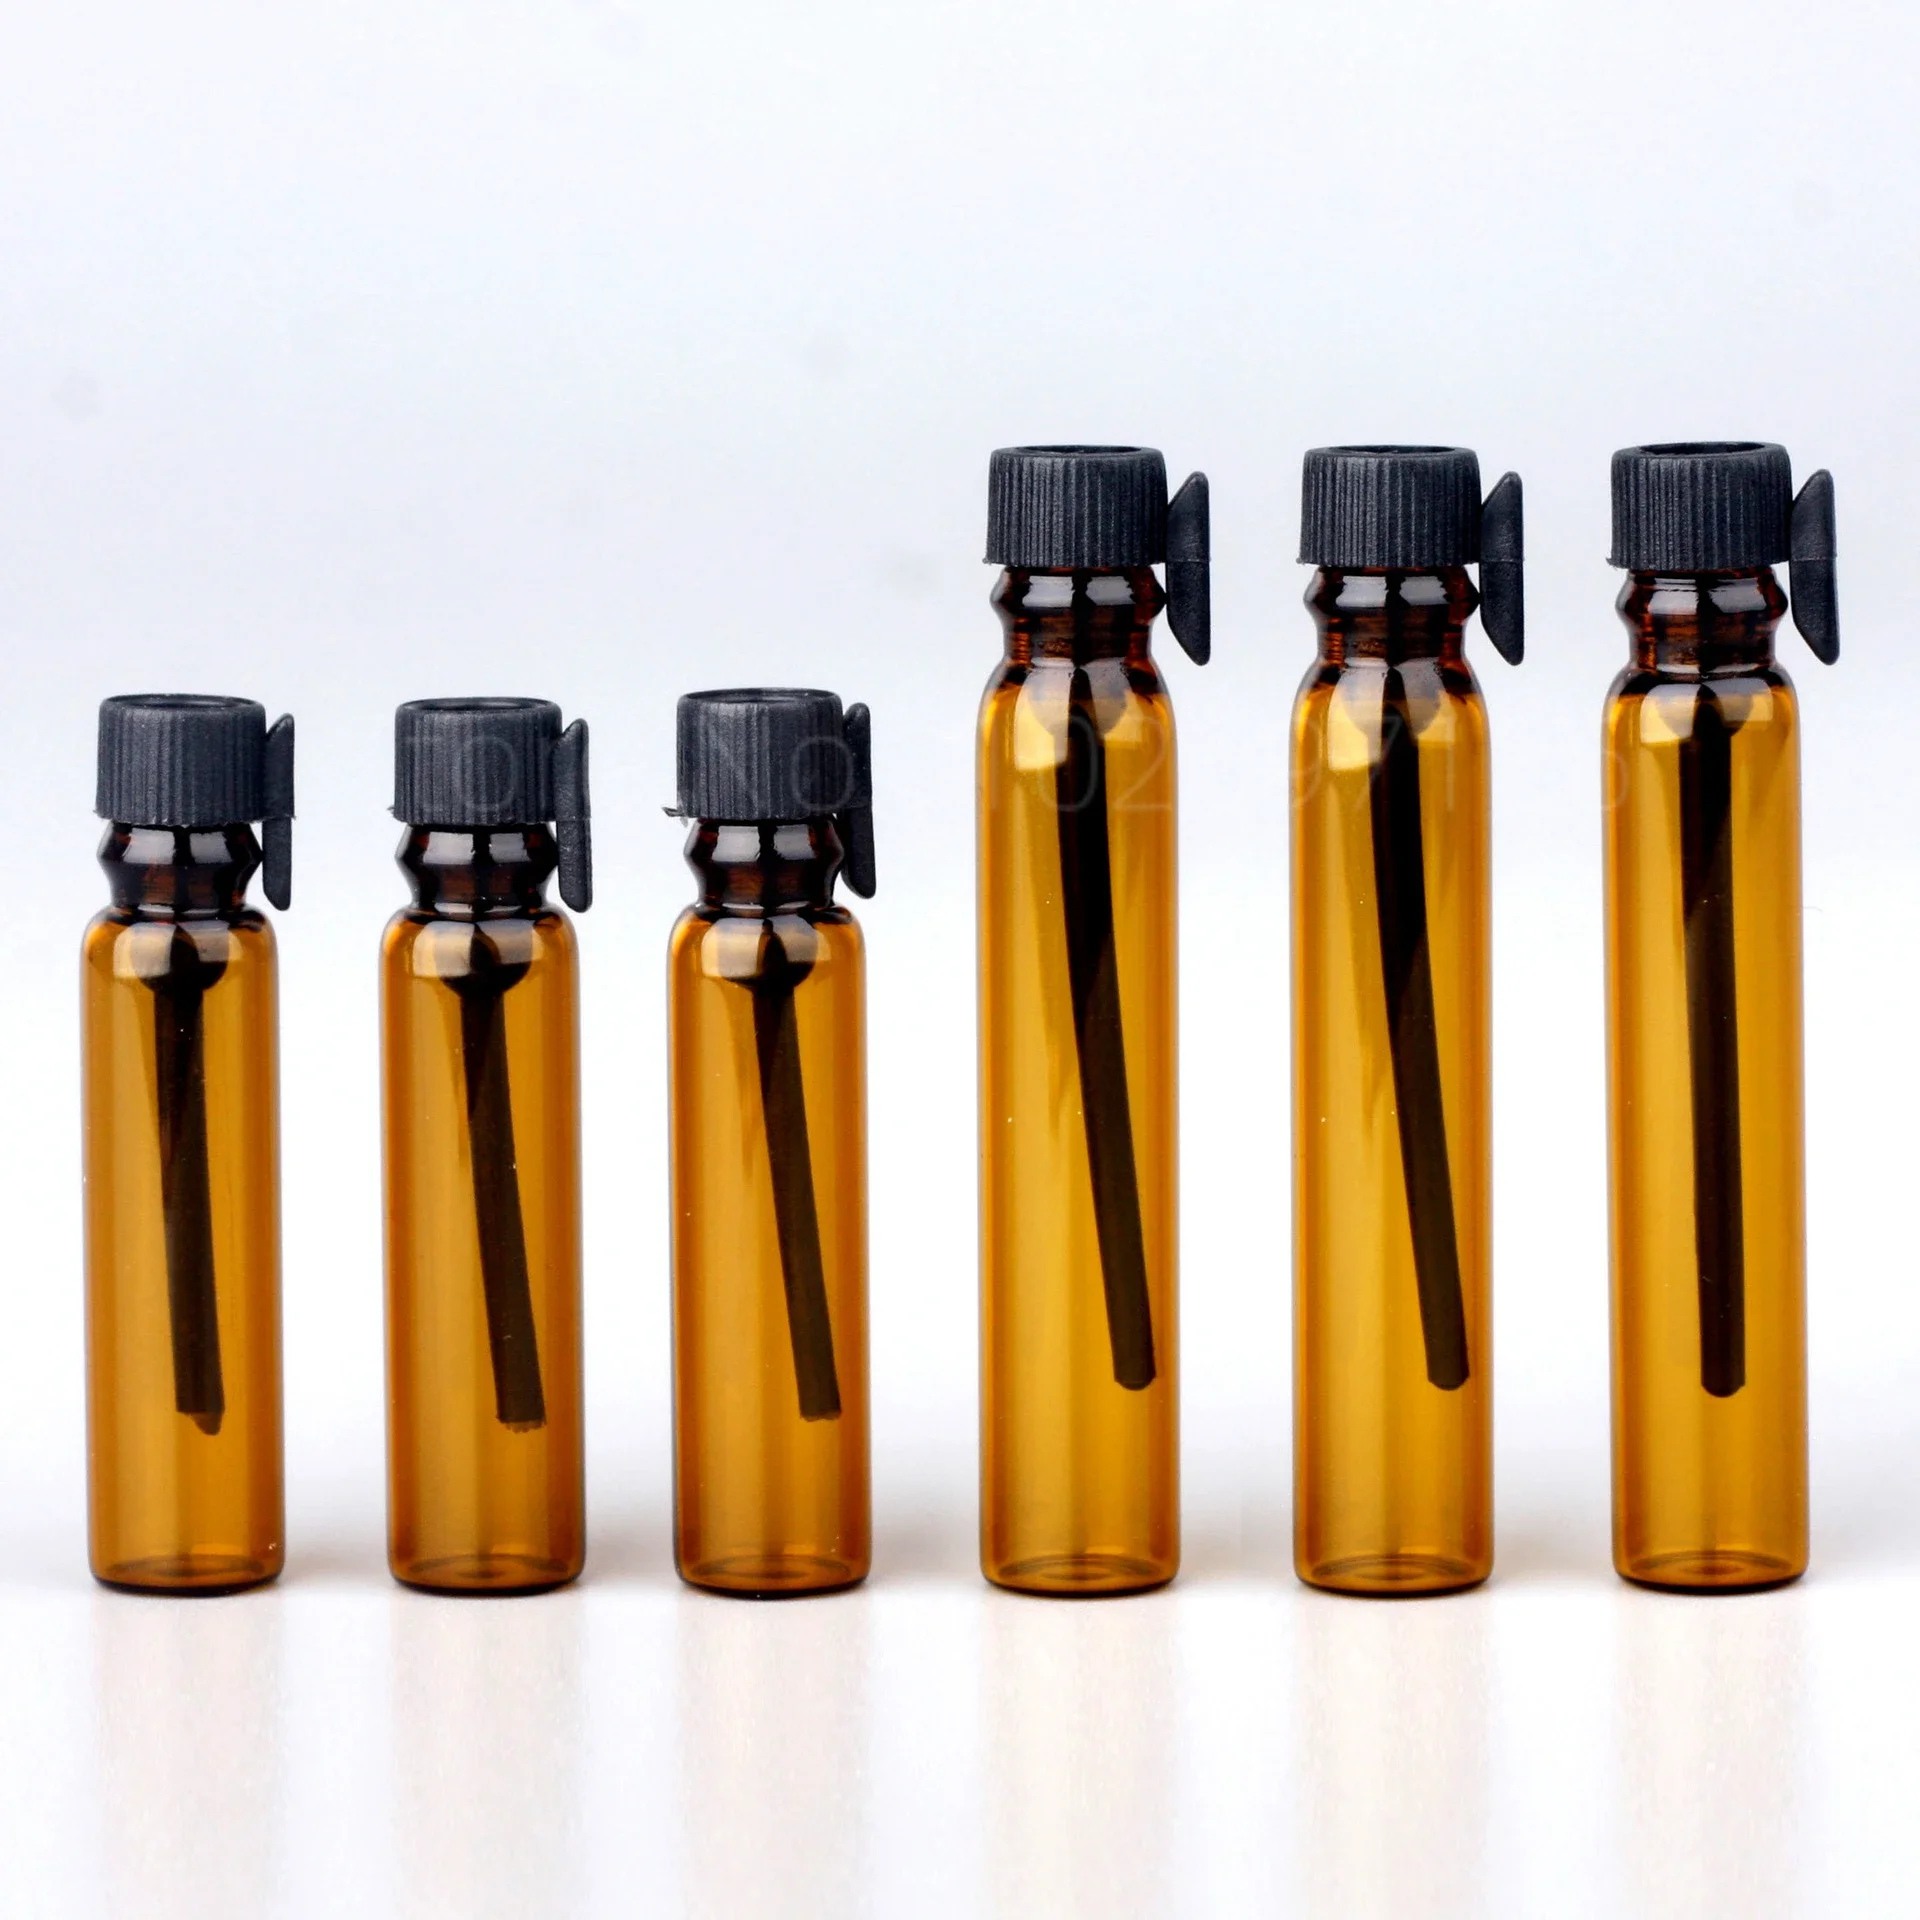 Glass Dropper Bottle Transparent Mini 1ml 2ml Stick Essential Oil with Inner Stopper Sample Trial Use Perfume Sub Bottles Empty glass test tube 50 pcs lot glass bottle 17 22 80mm cork stopper mini bottles small diy jars wedding decorative vials